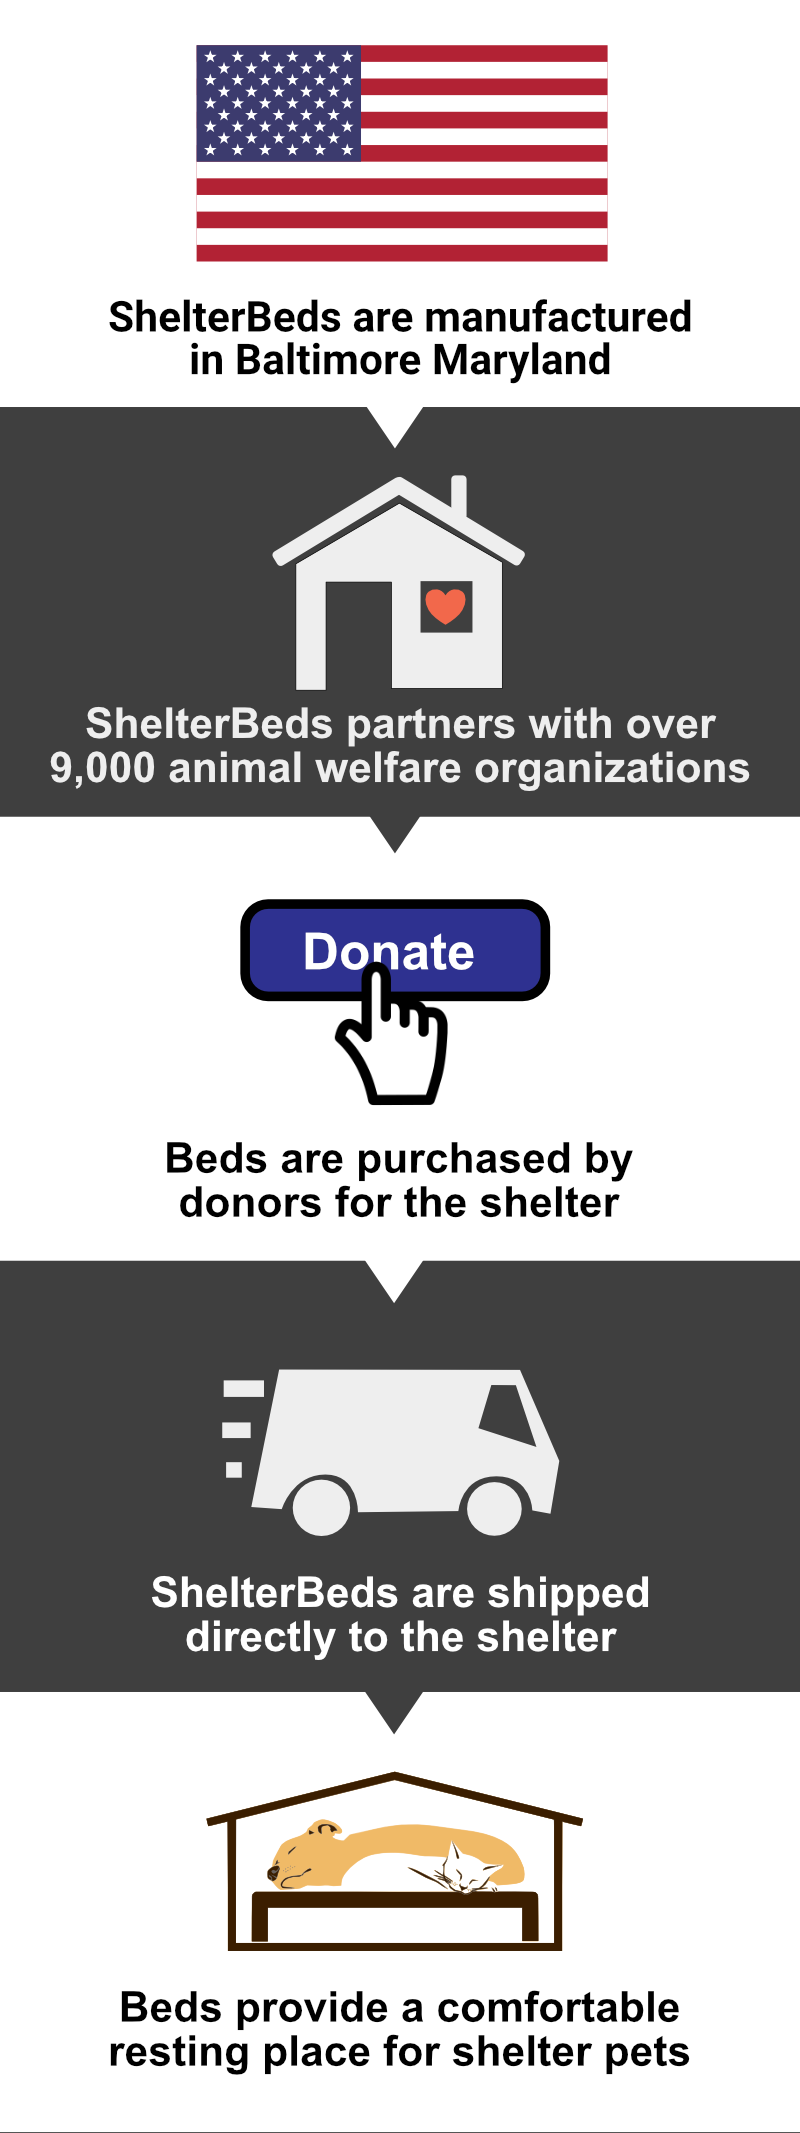 How the Shelter Program Works Infographic - ShelterBeds are Manufactured in Baltimore Maryland. ShelterBeds partners with over 9.000 animal welfare organizations. Beds are purchased by donors for the shelter. ShelterBeds are shipped directly to the shelter. Beds provide a comfortable resting place for shelter pets.